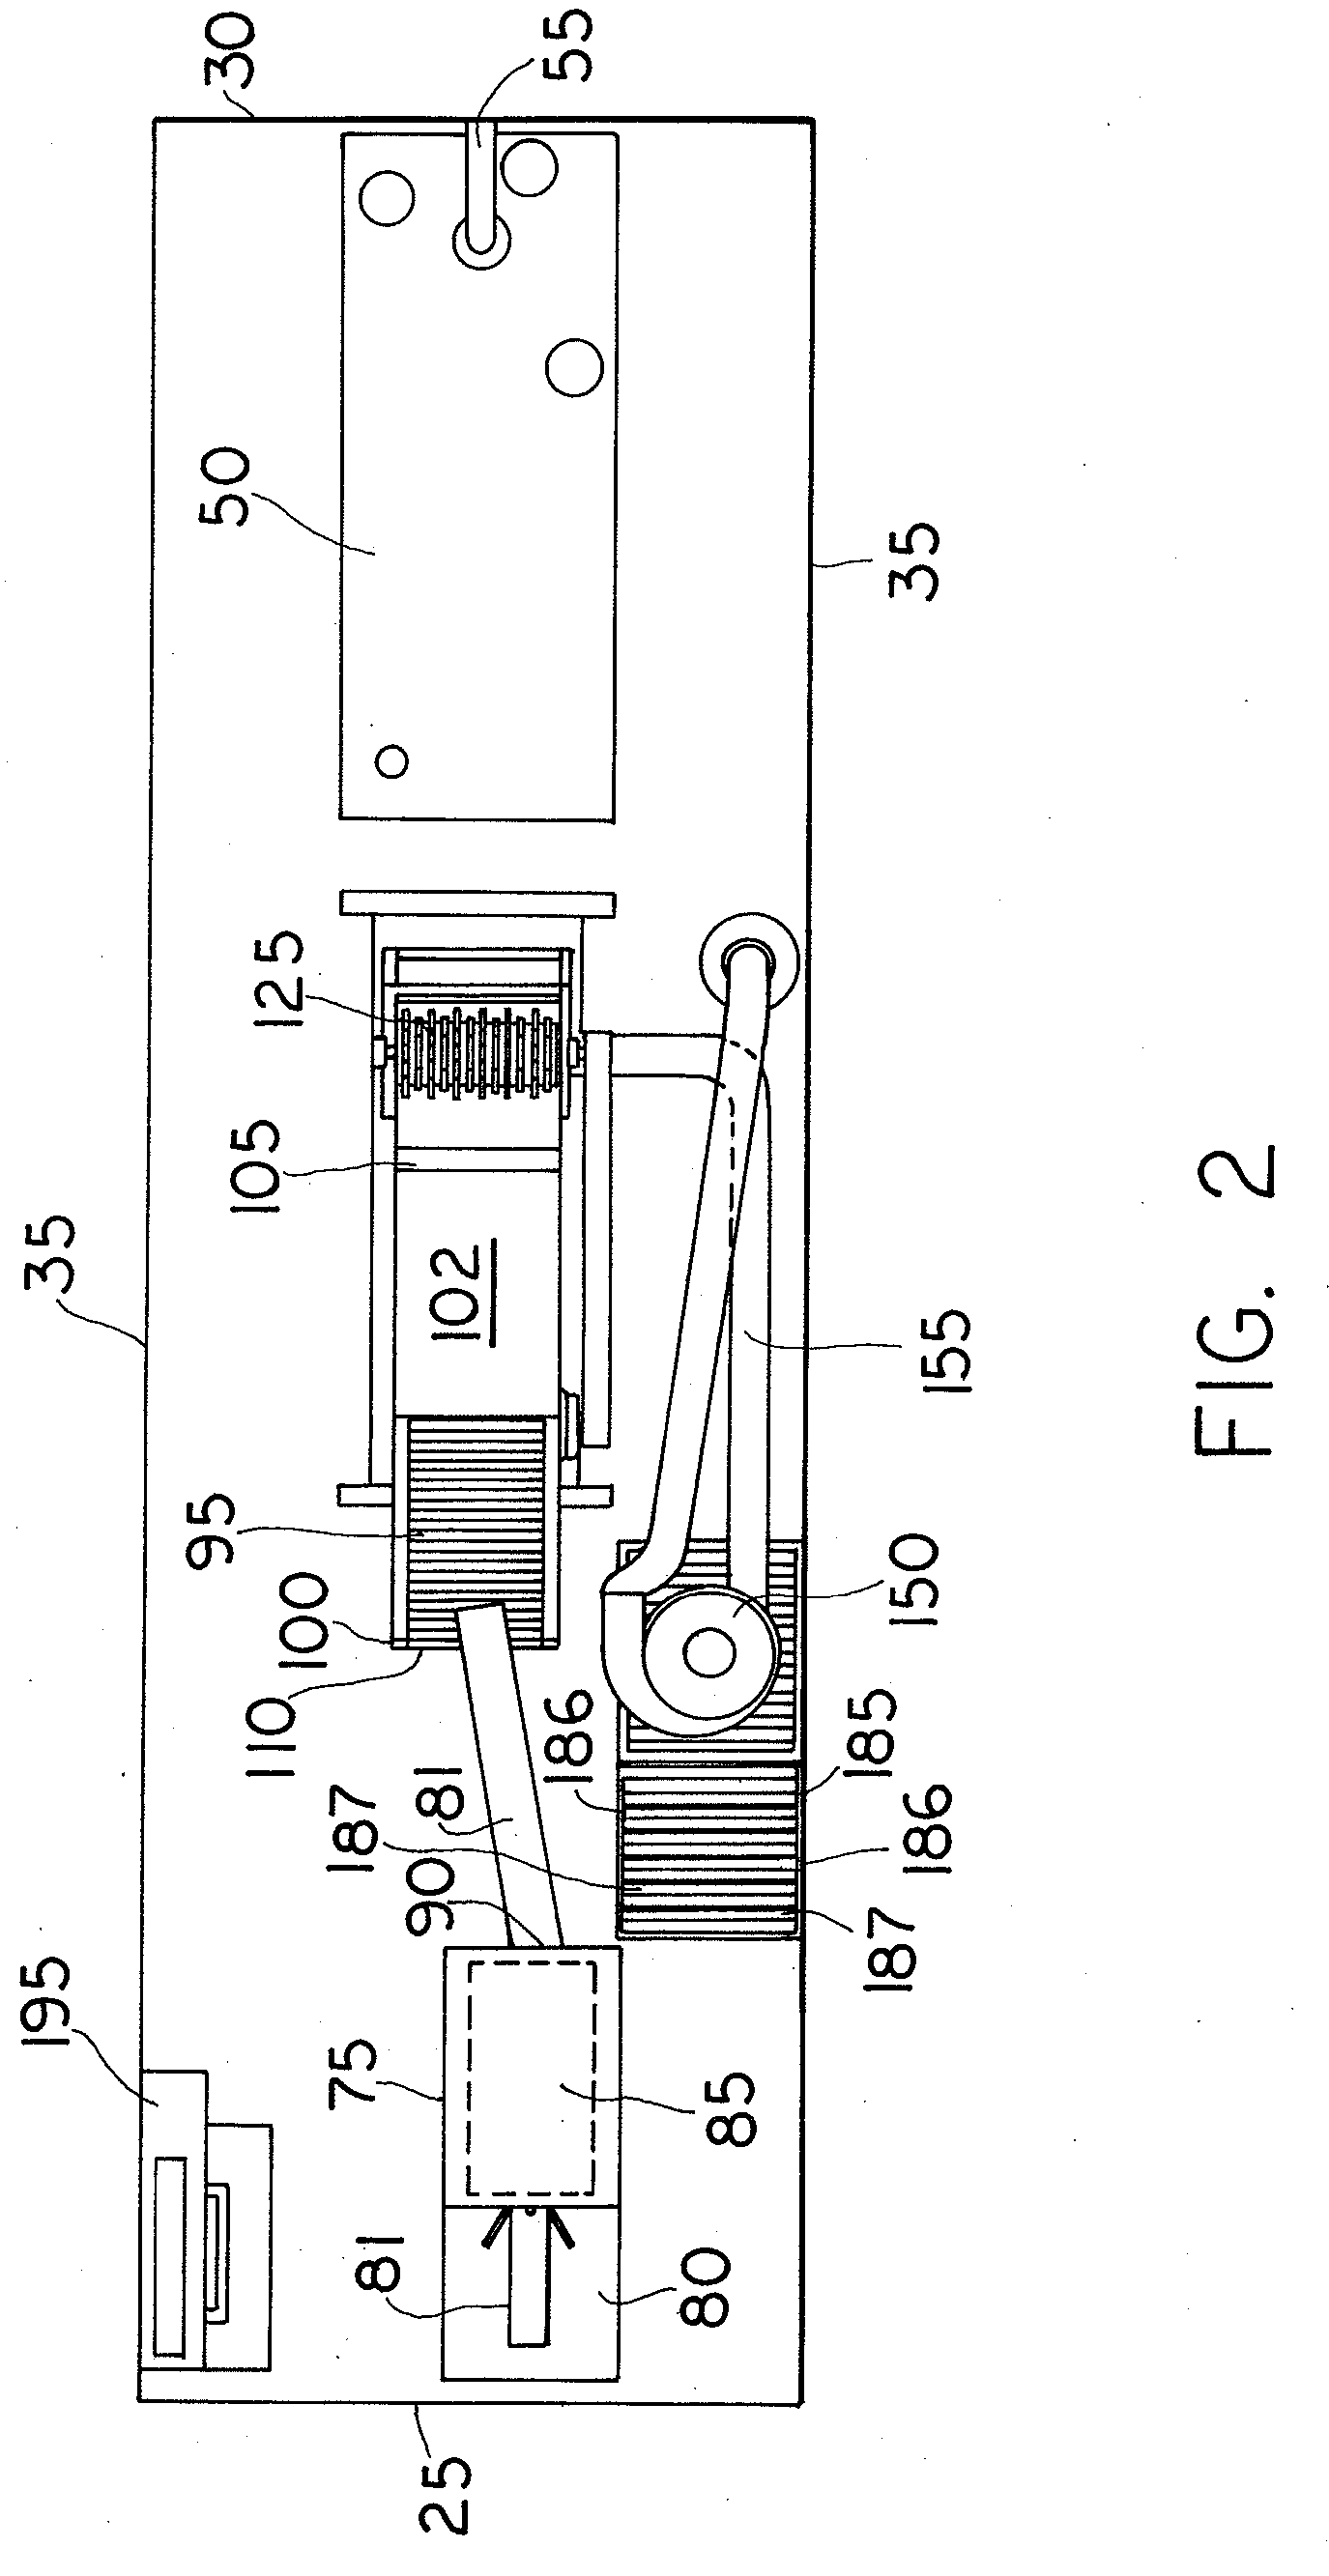 Method and apparatus for mobile, on-site degaussing and physical e-commerce destruction